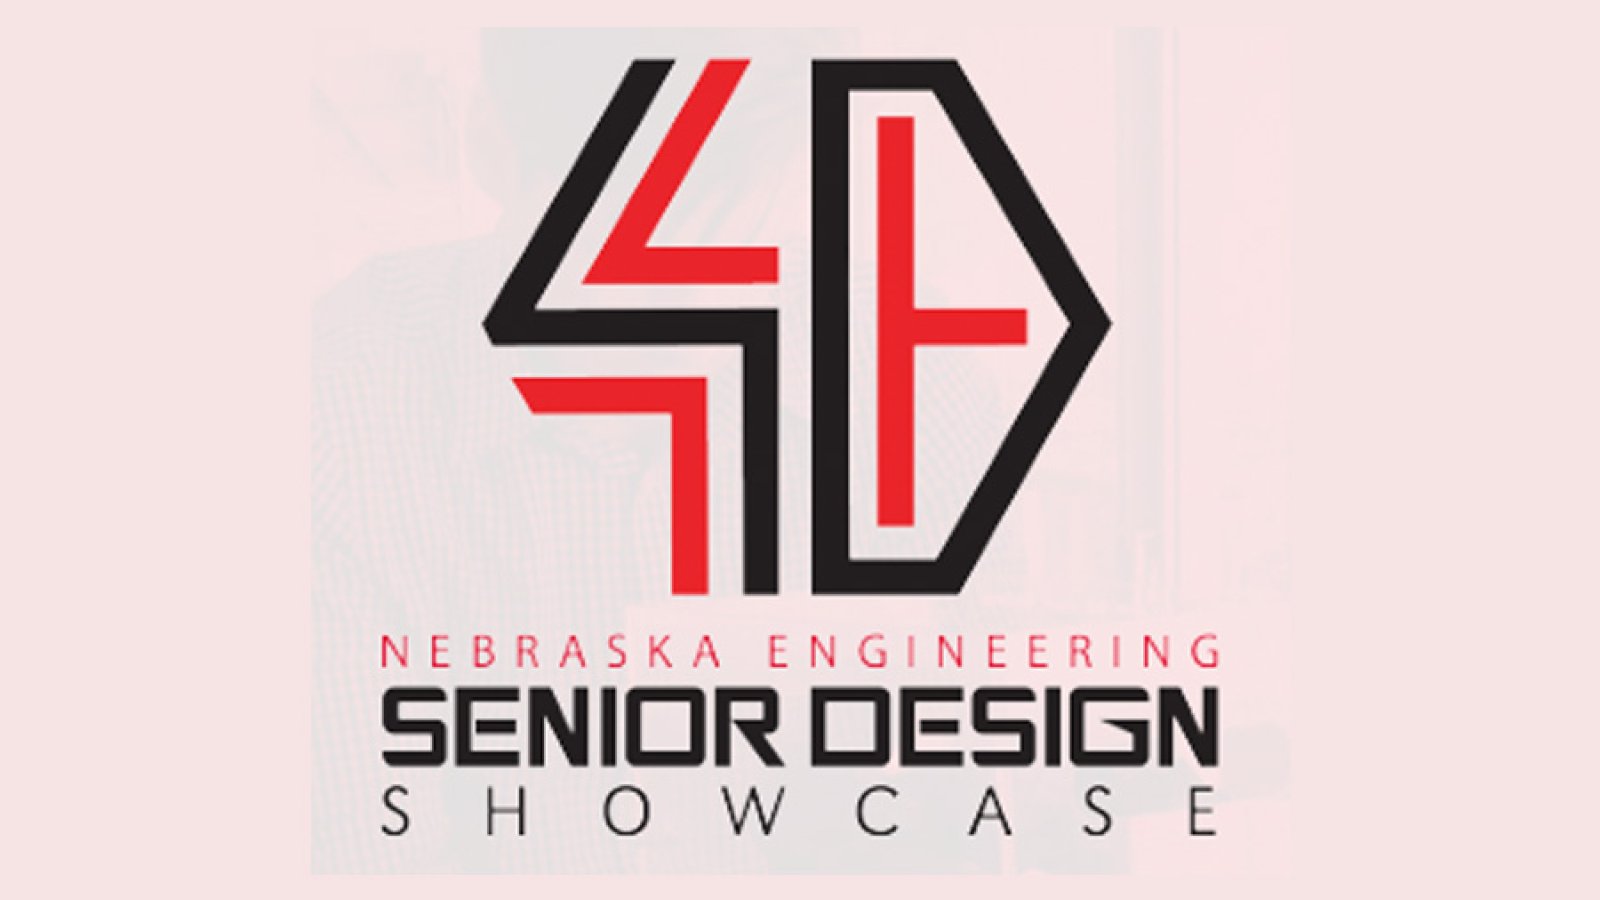 The College of Engineering Senior Design Showcase is May 3 from 1-3:30 p.m. in Kiewit Hall.